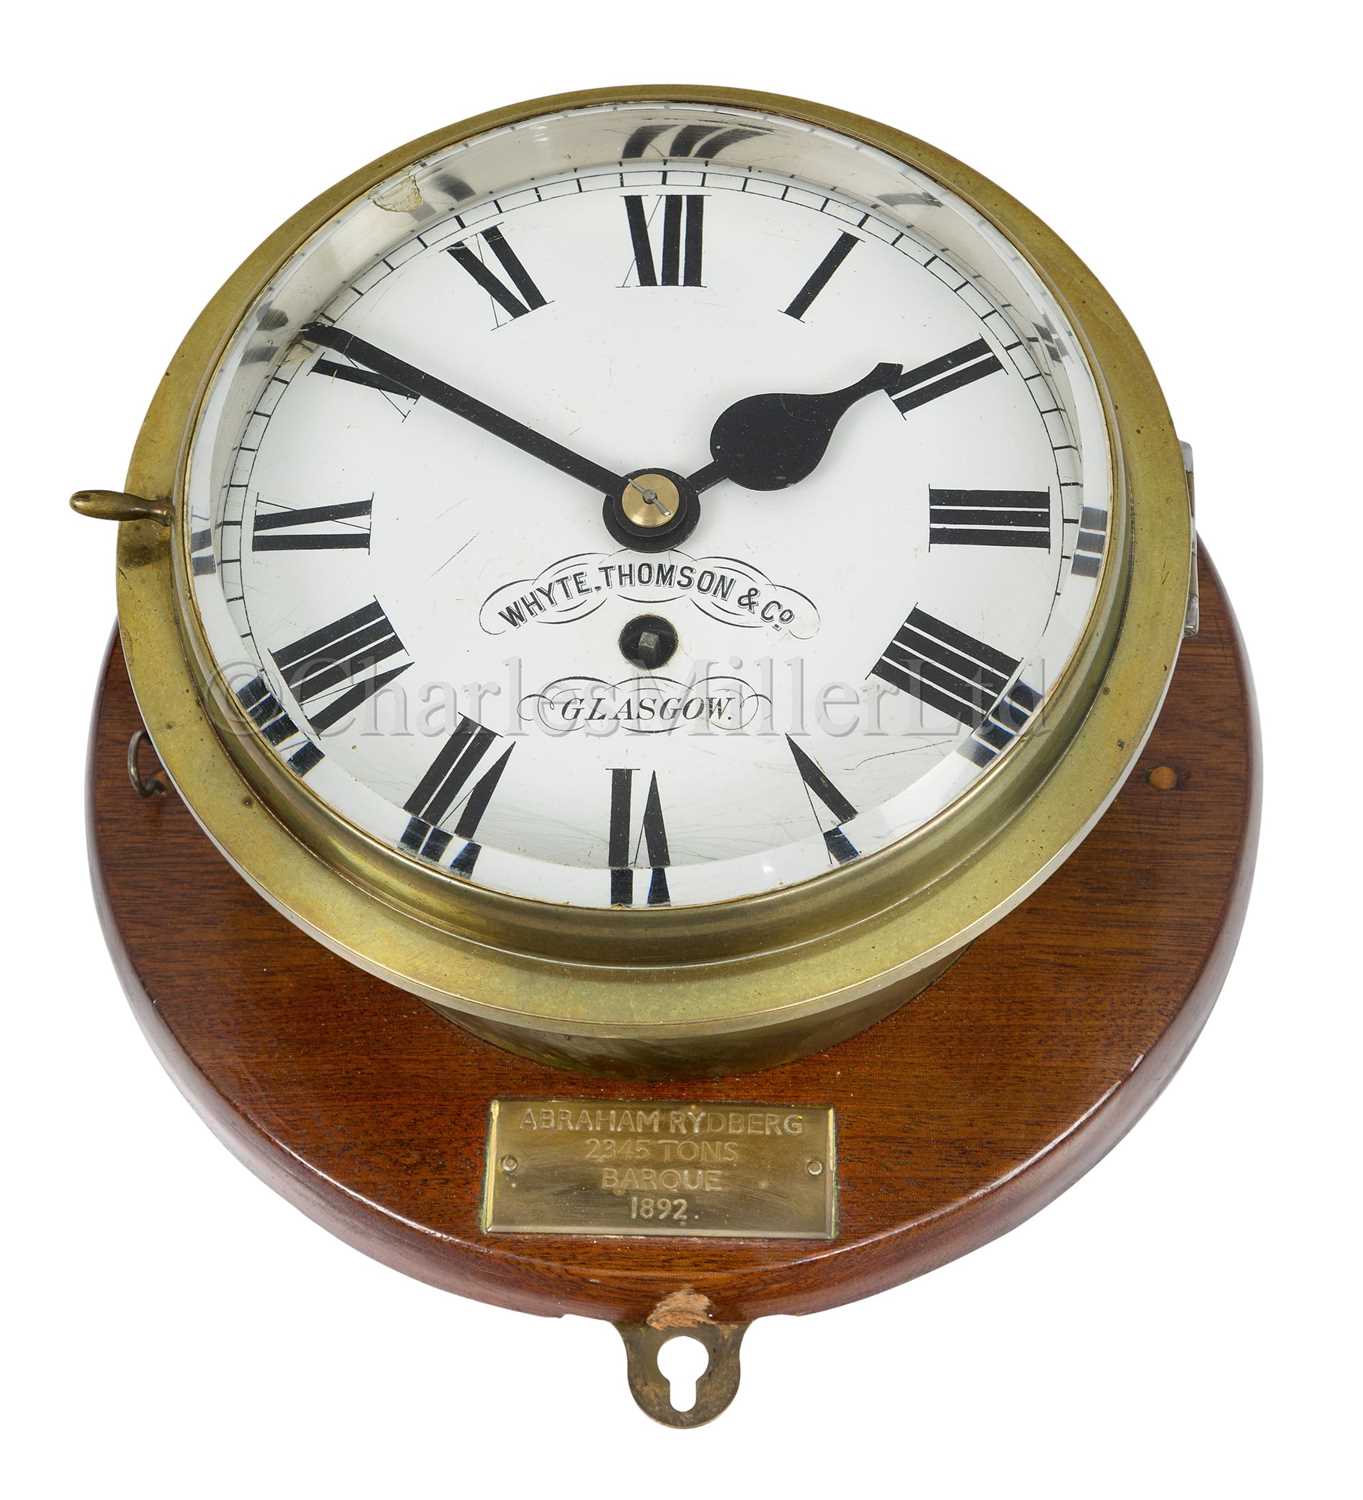 Lot 18 - AN EIGHT-DAY SHIP'S CLOCK FROM THE BARQUE ABRAHAM RYDBERG, 1892